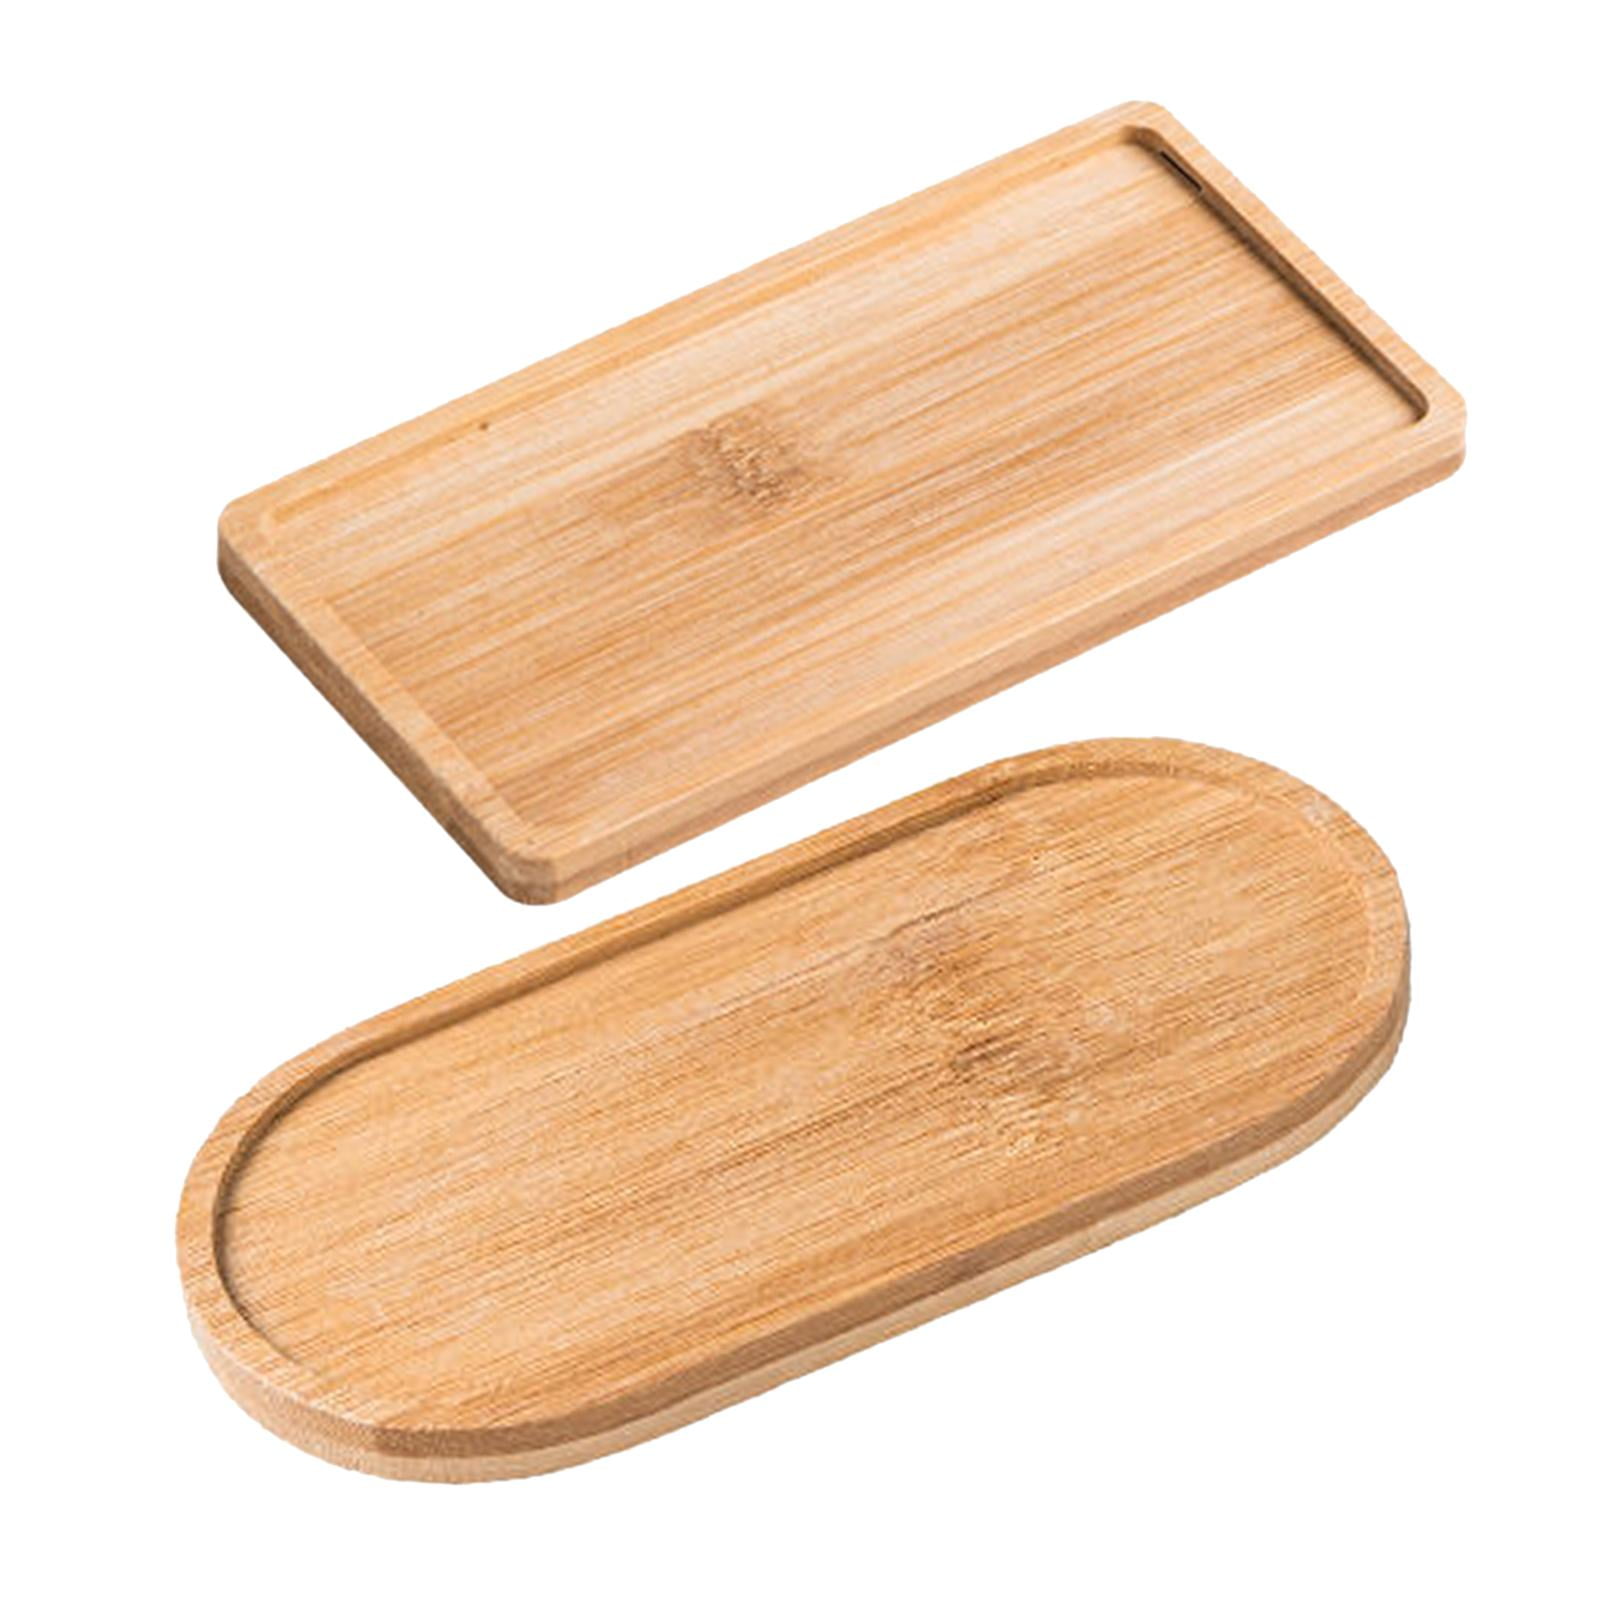 Wooden Tray, Oil Dispenser and Vanity Tray (2 Pack), Wooden Serving Tray